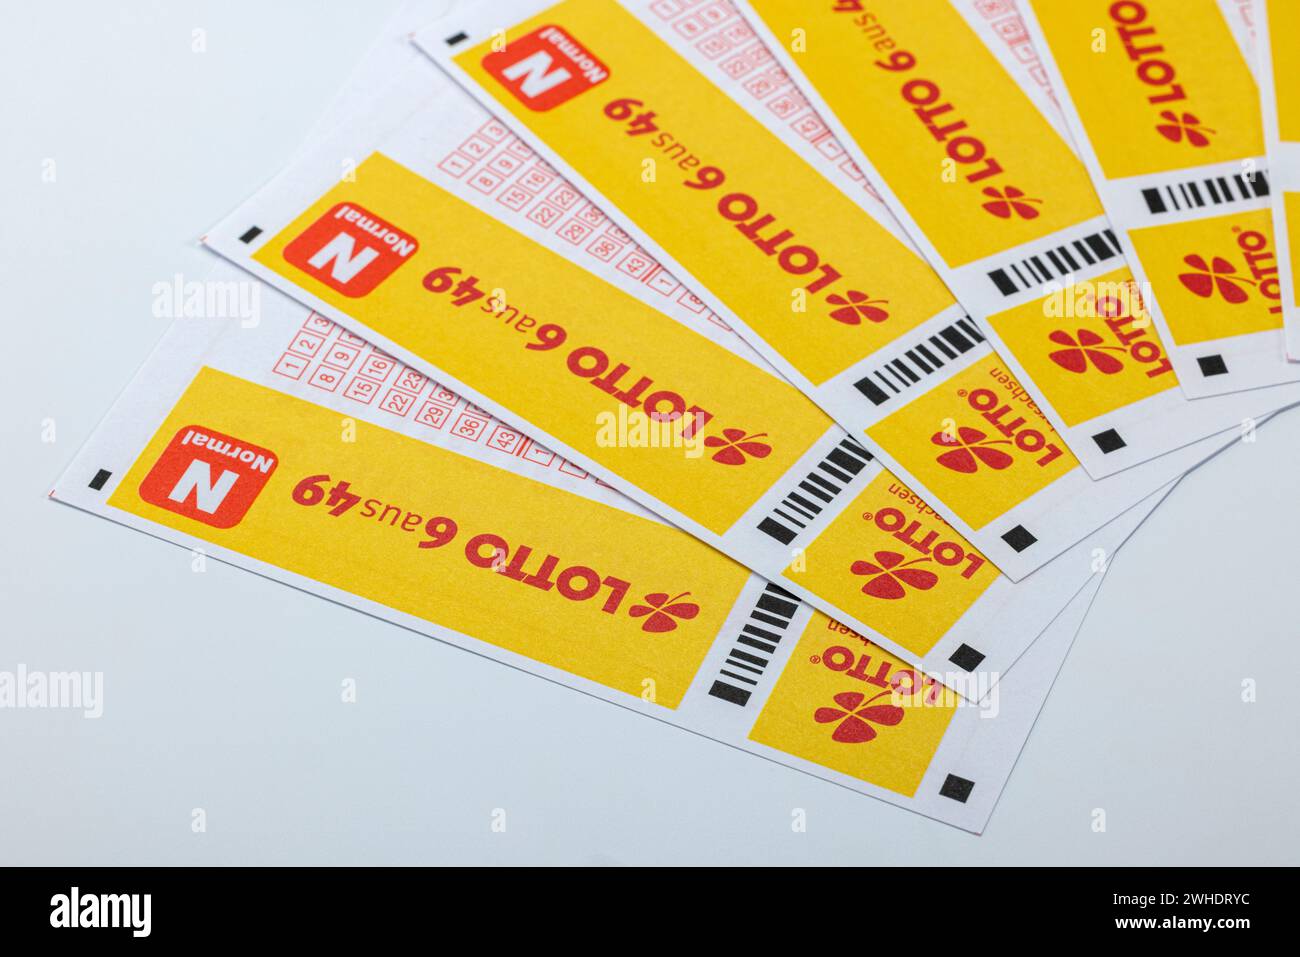 Several unfilled lottery tickets, detail, LOTTO 6aus49 lettering, Stock Photo